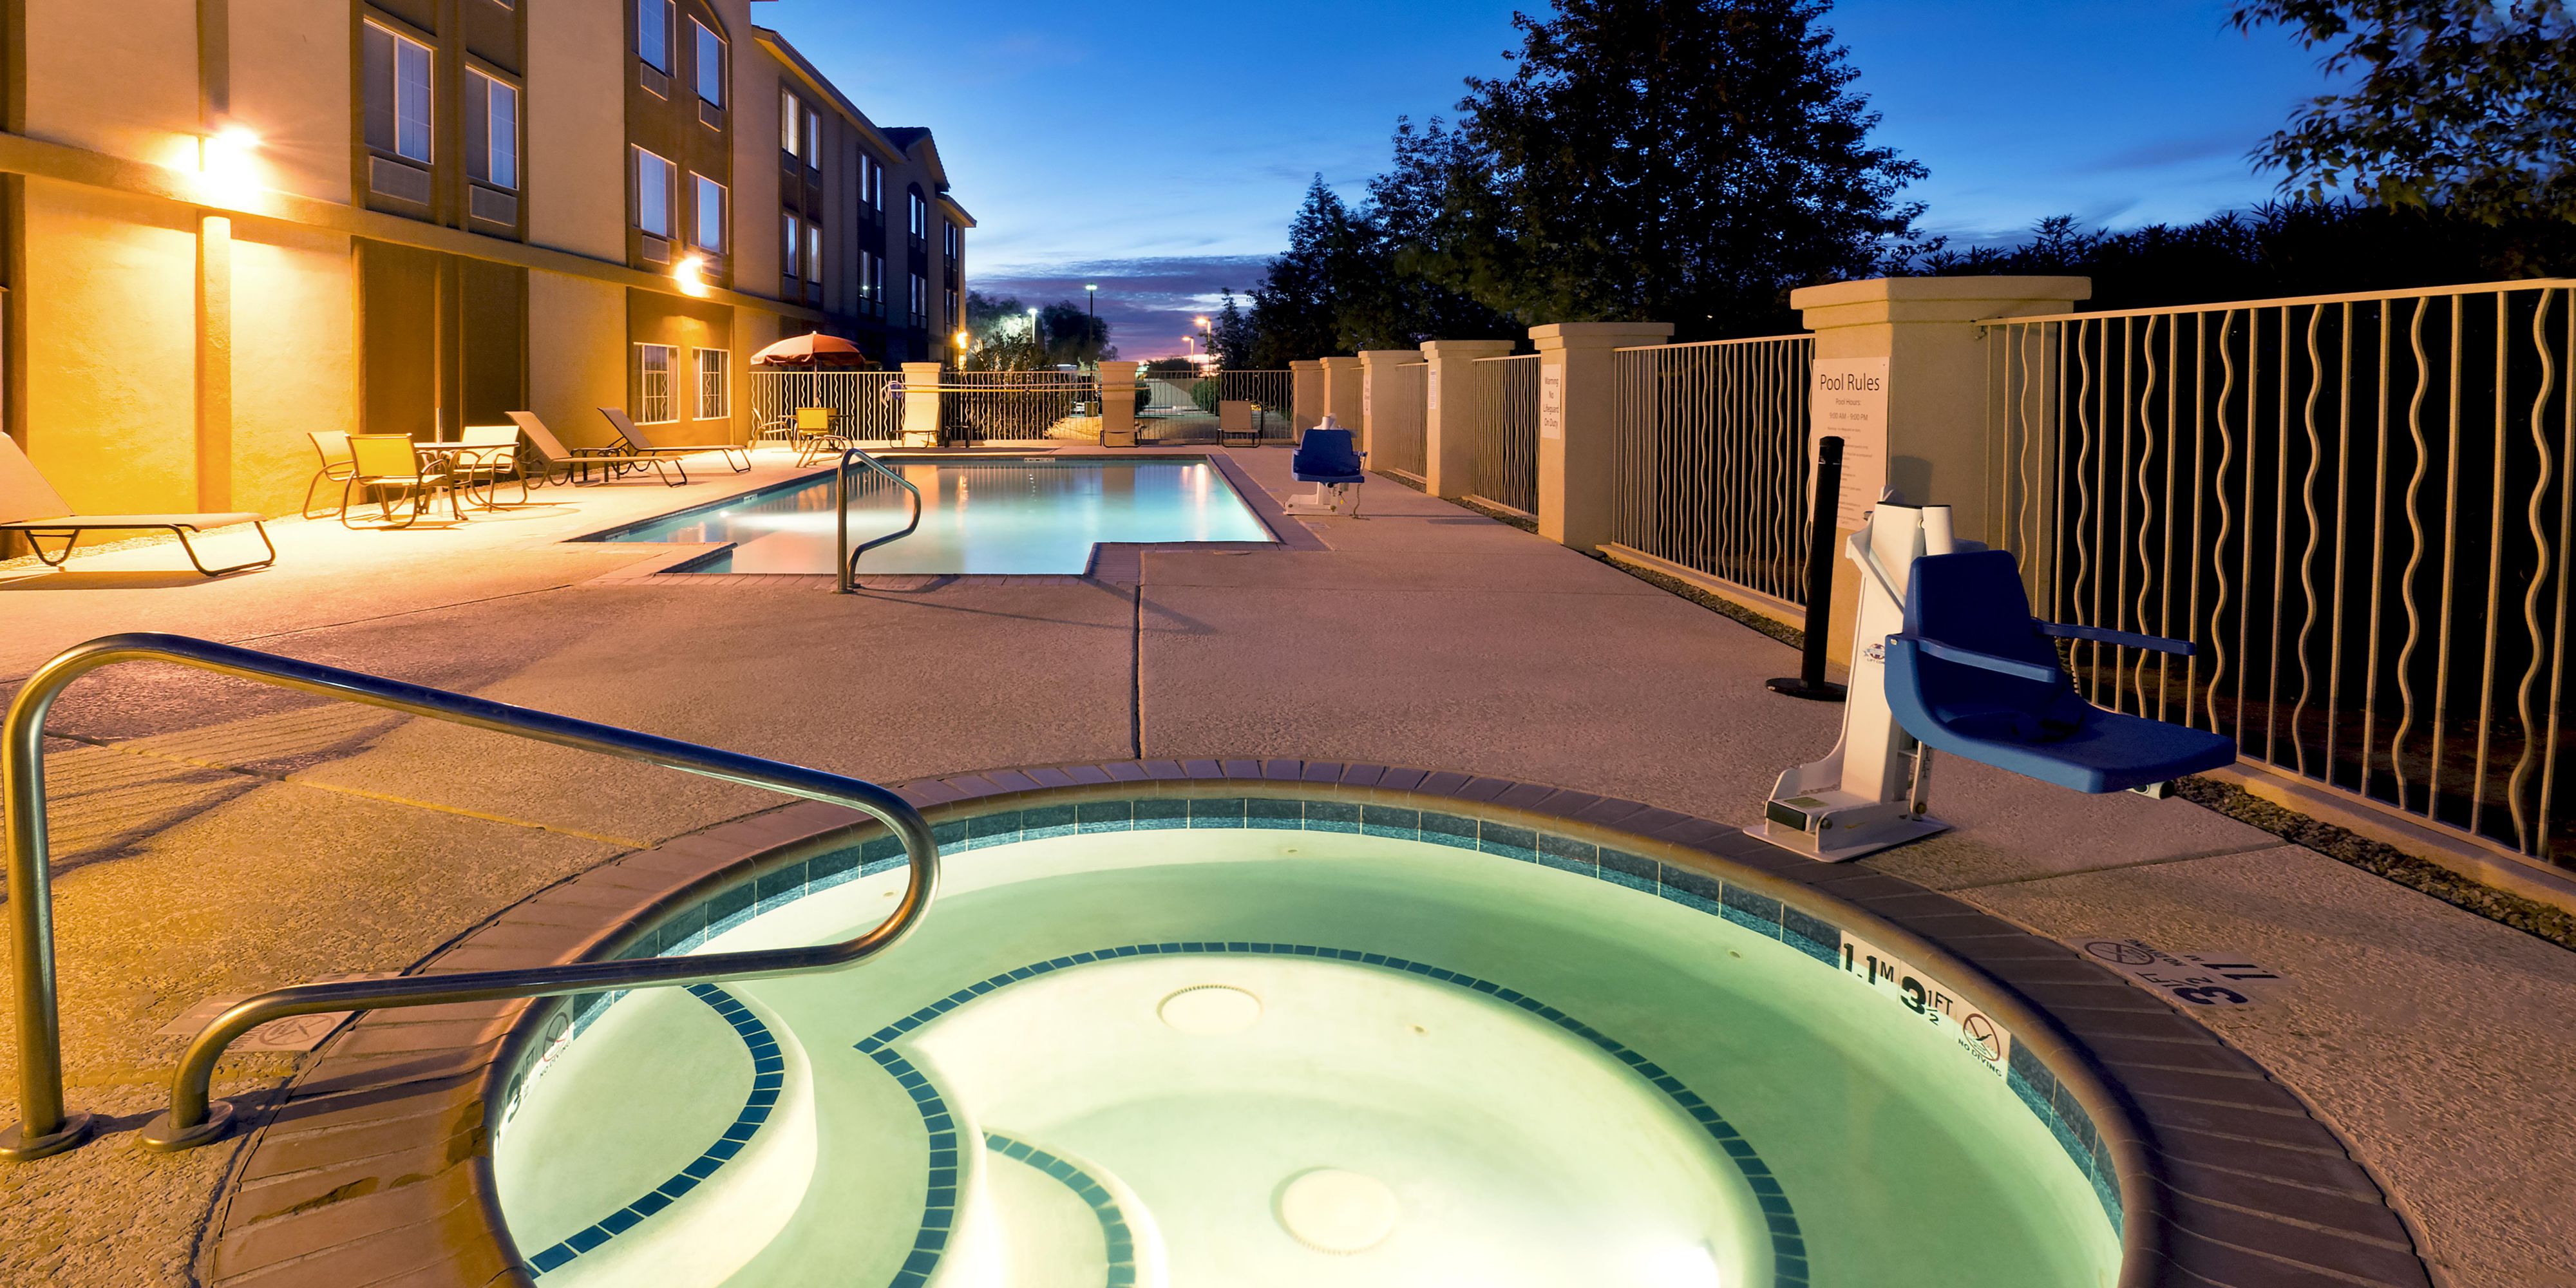 Check out our beautiful outdoor pool and hot tub. Hours are 9 AM to 9 PM.